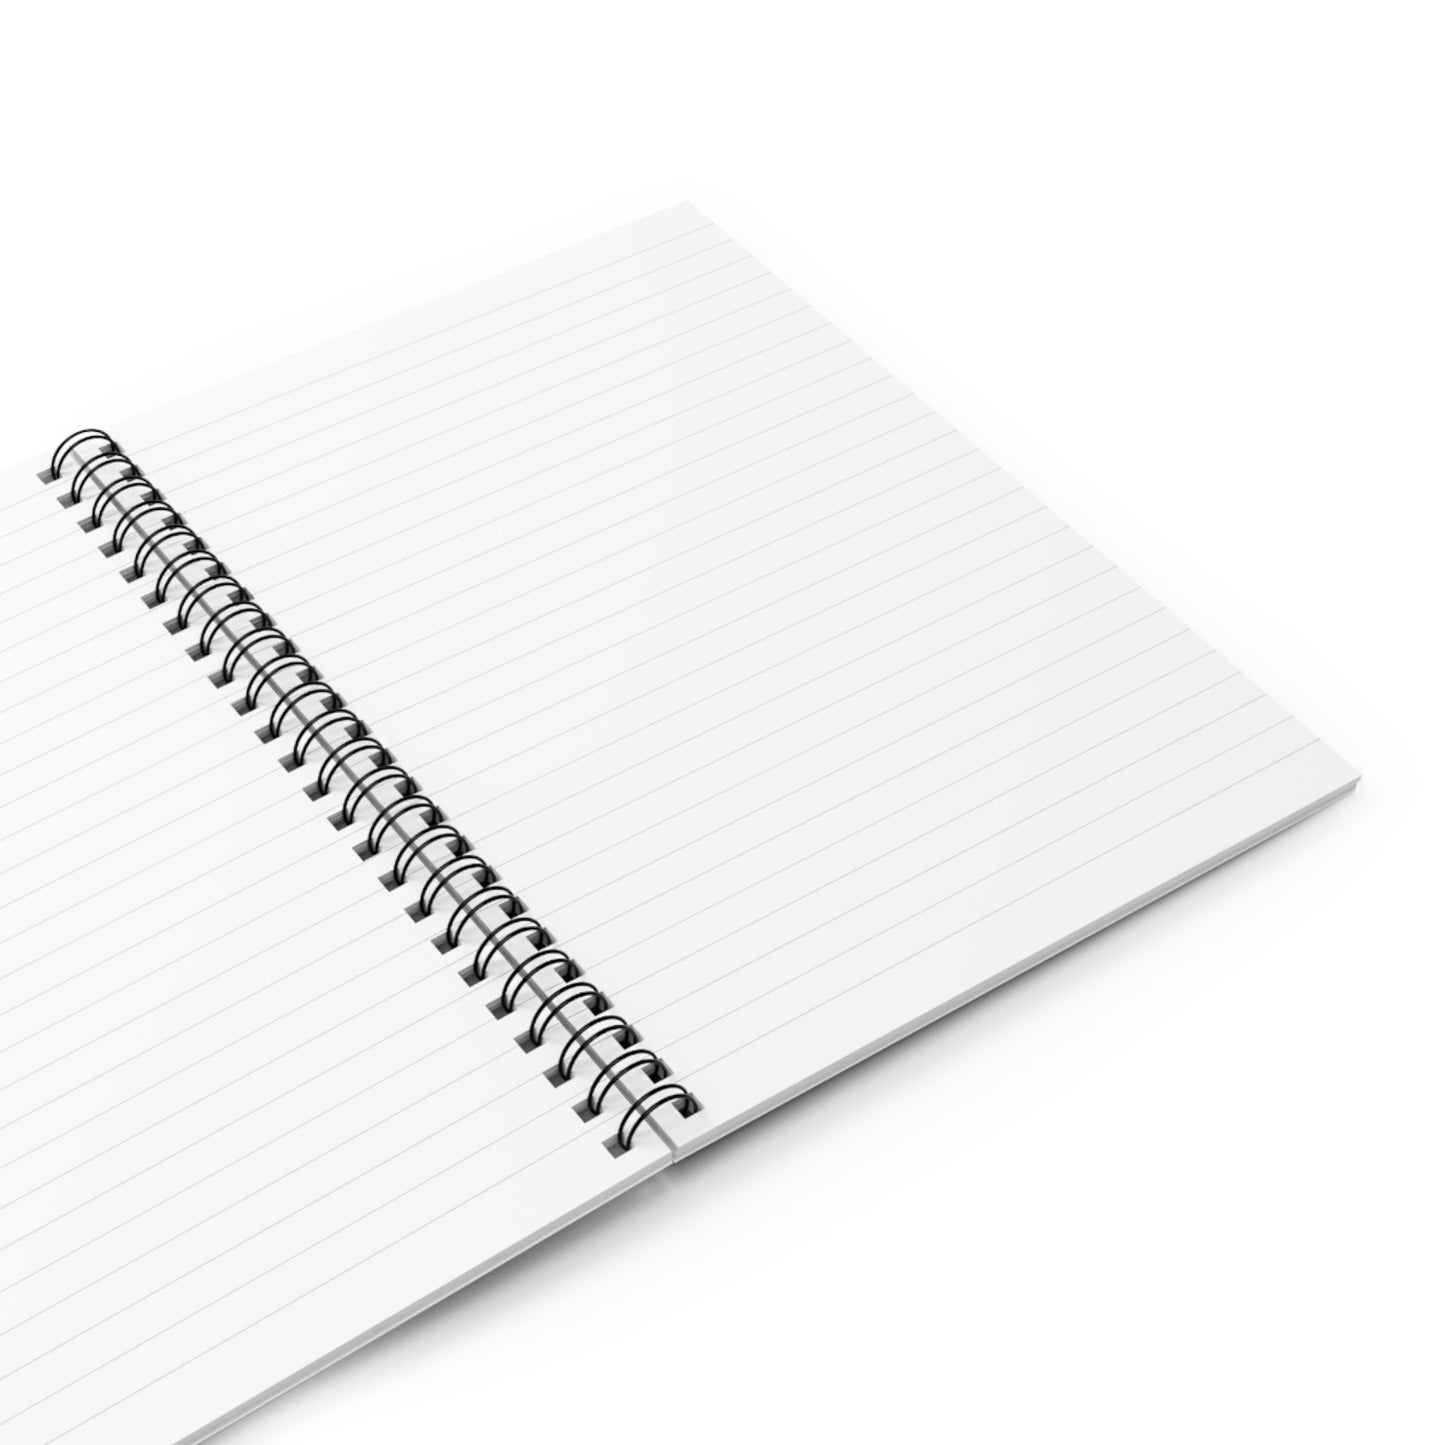 Spiral Notebook with Aesthetic Wing Cover Opened with Blank White College Ruled Pages